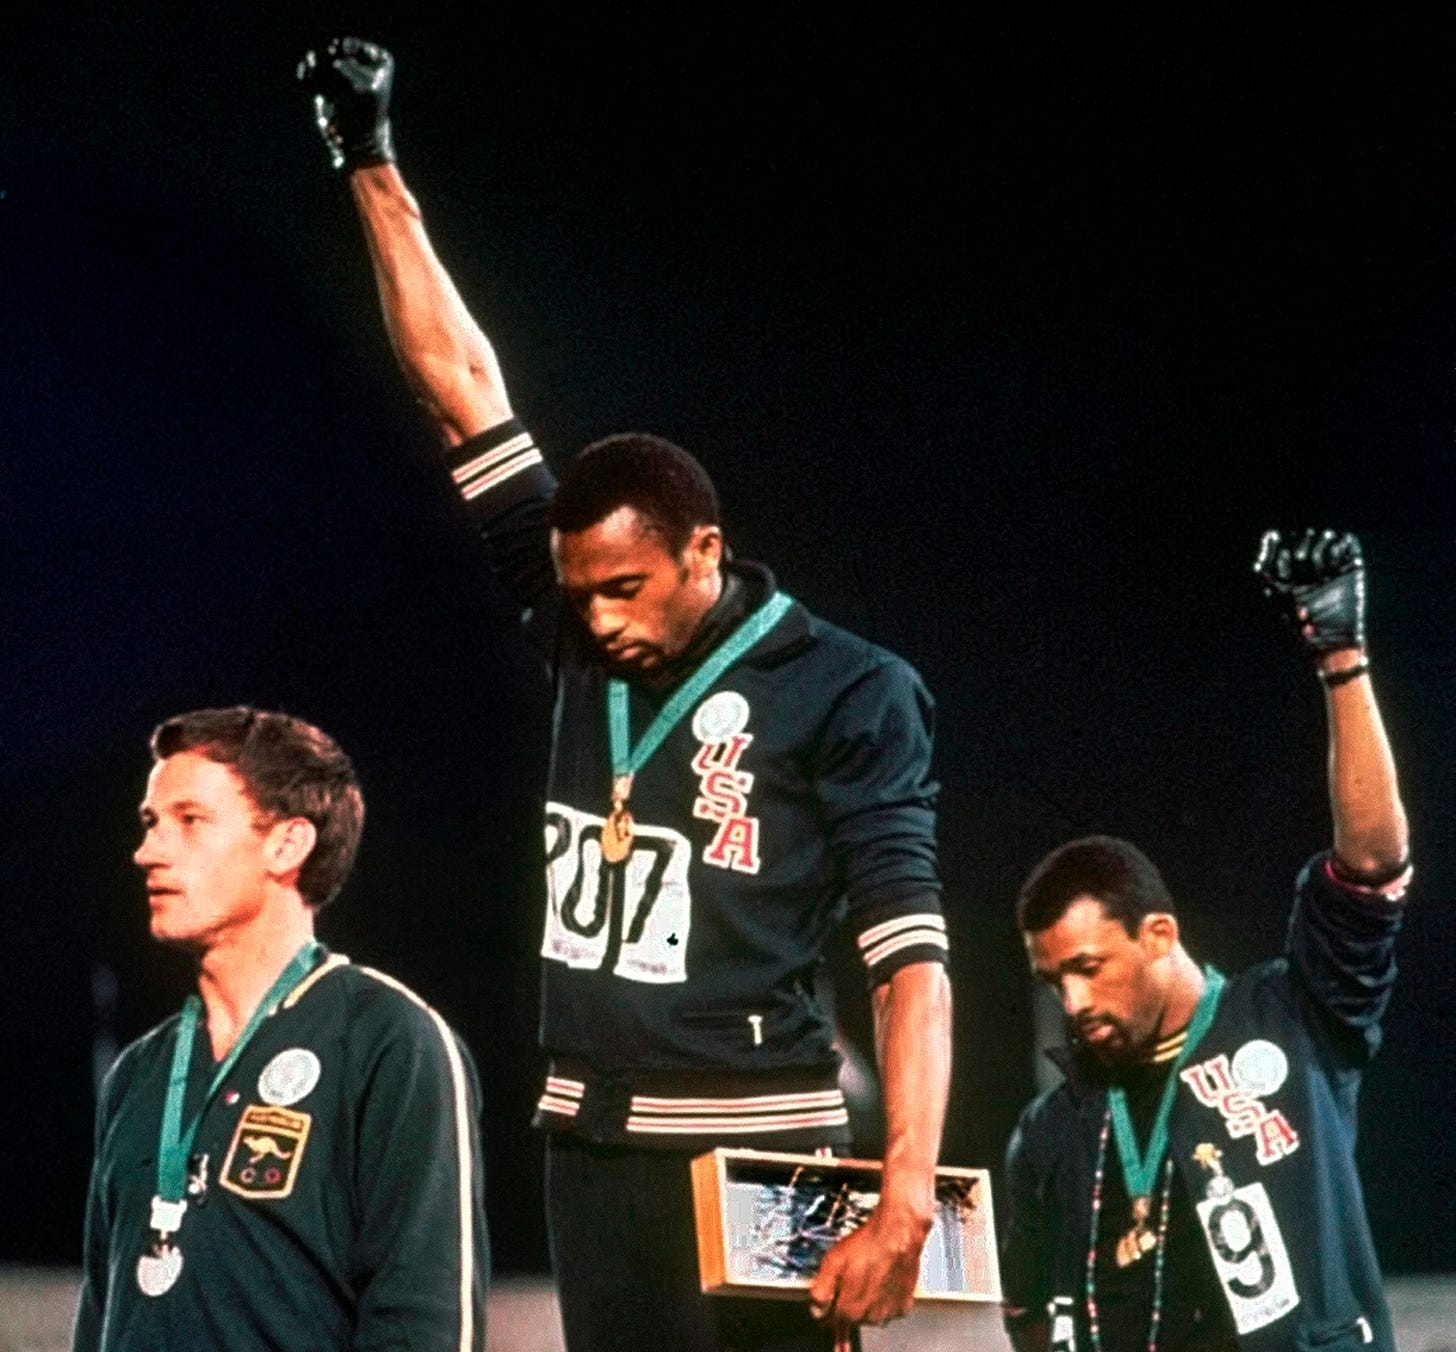 Black Power salute photo: Tommie Smith and John Carlos raised their fists  during the 1968 Summer Olympics in Mexico City - The Washington Post